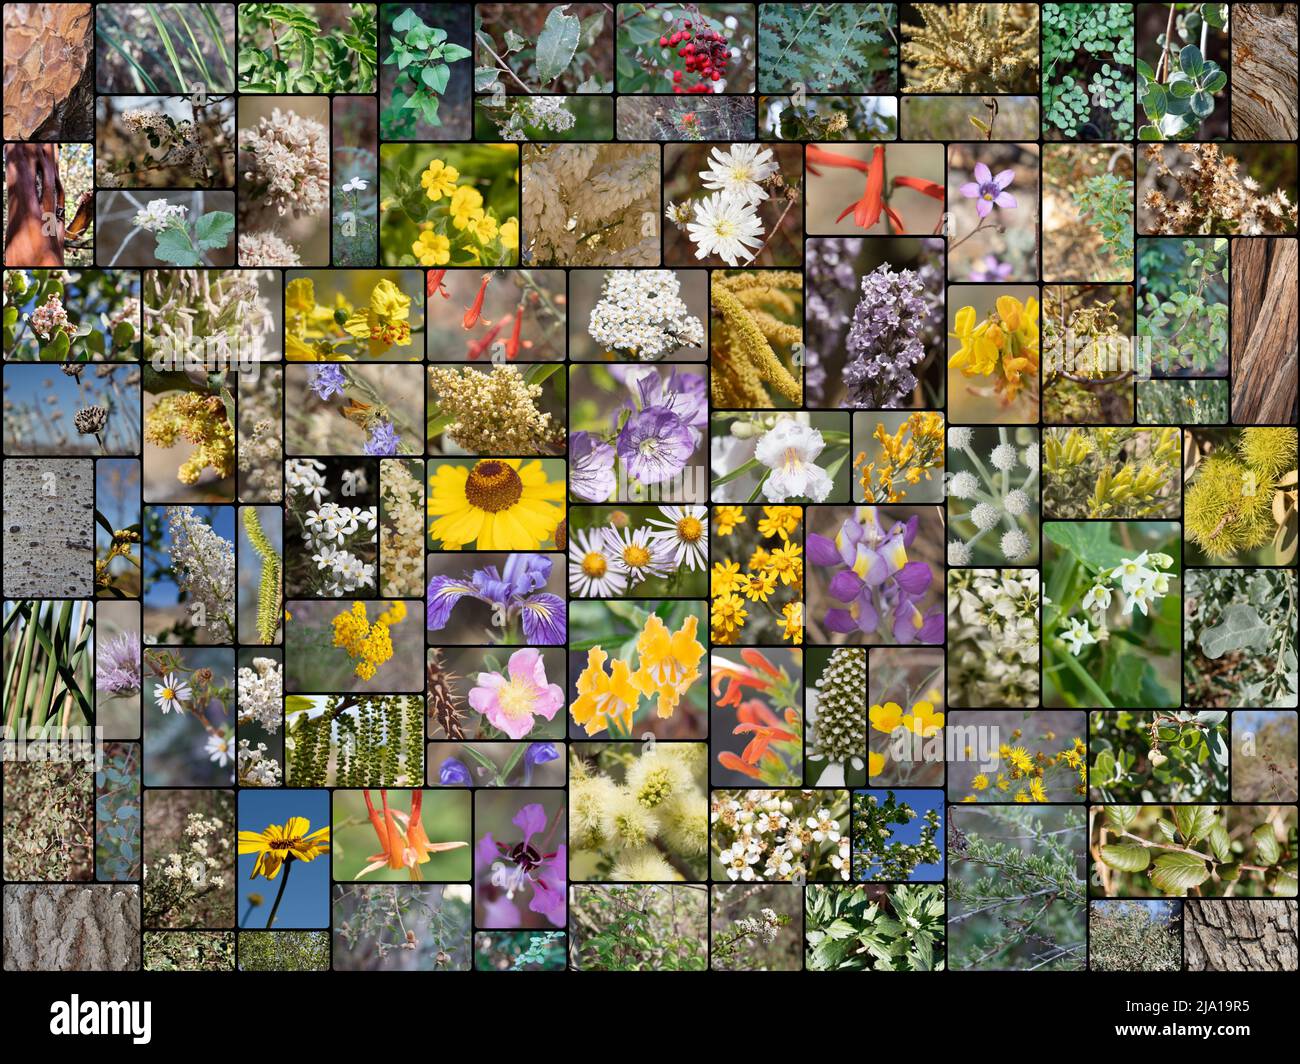 100 pictures spanning 88 different species of Southern California Indigenous plants growing wild in their native habitat, photographed during 2021. Stock Photo